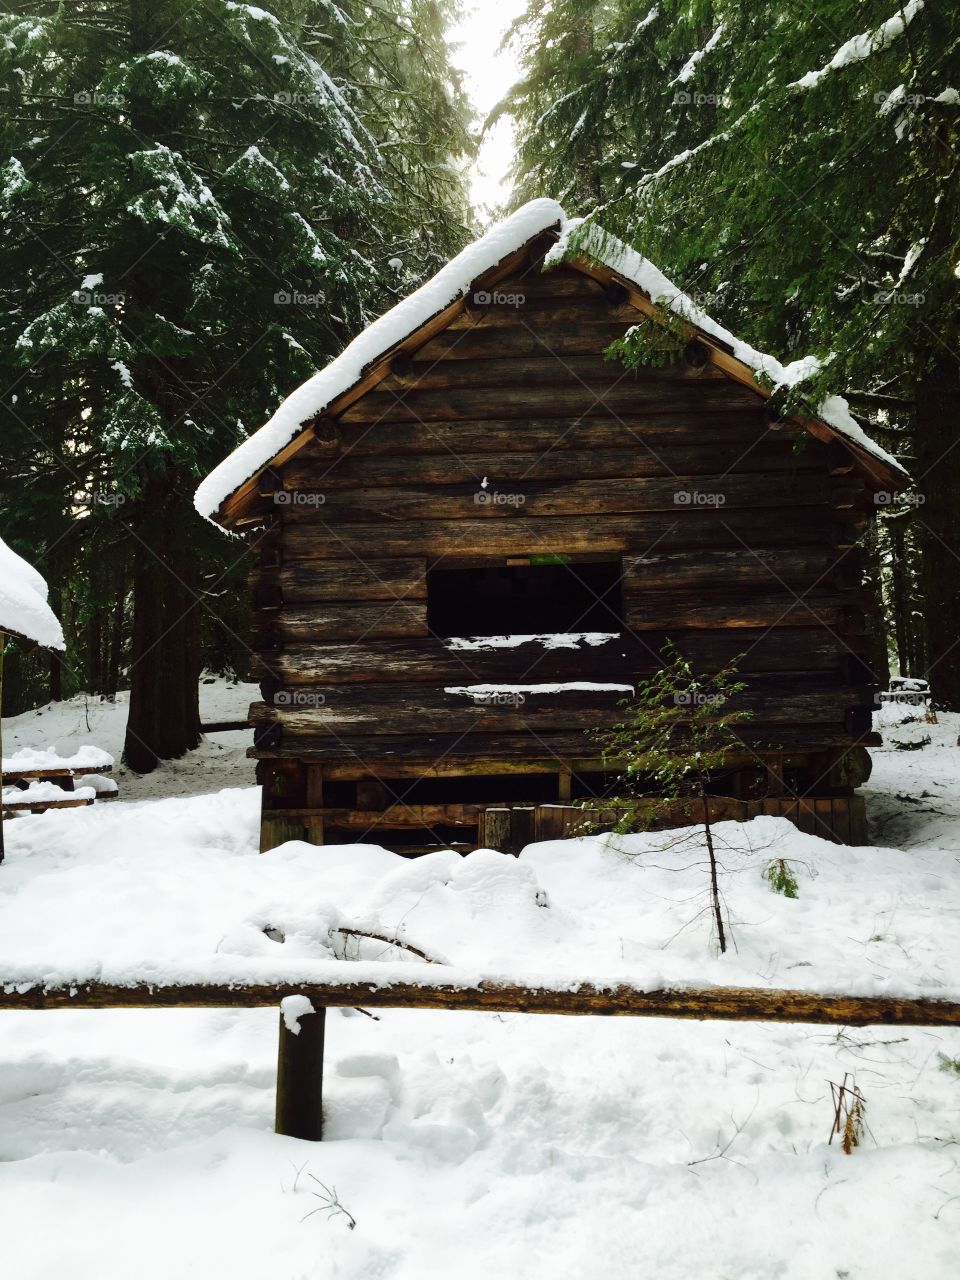 Snow, Winter, House, Cold, Wood